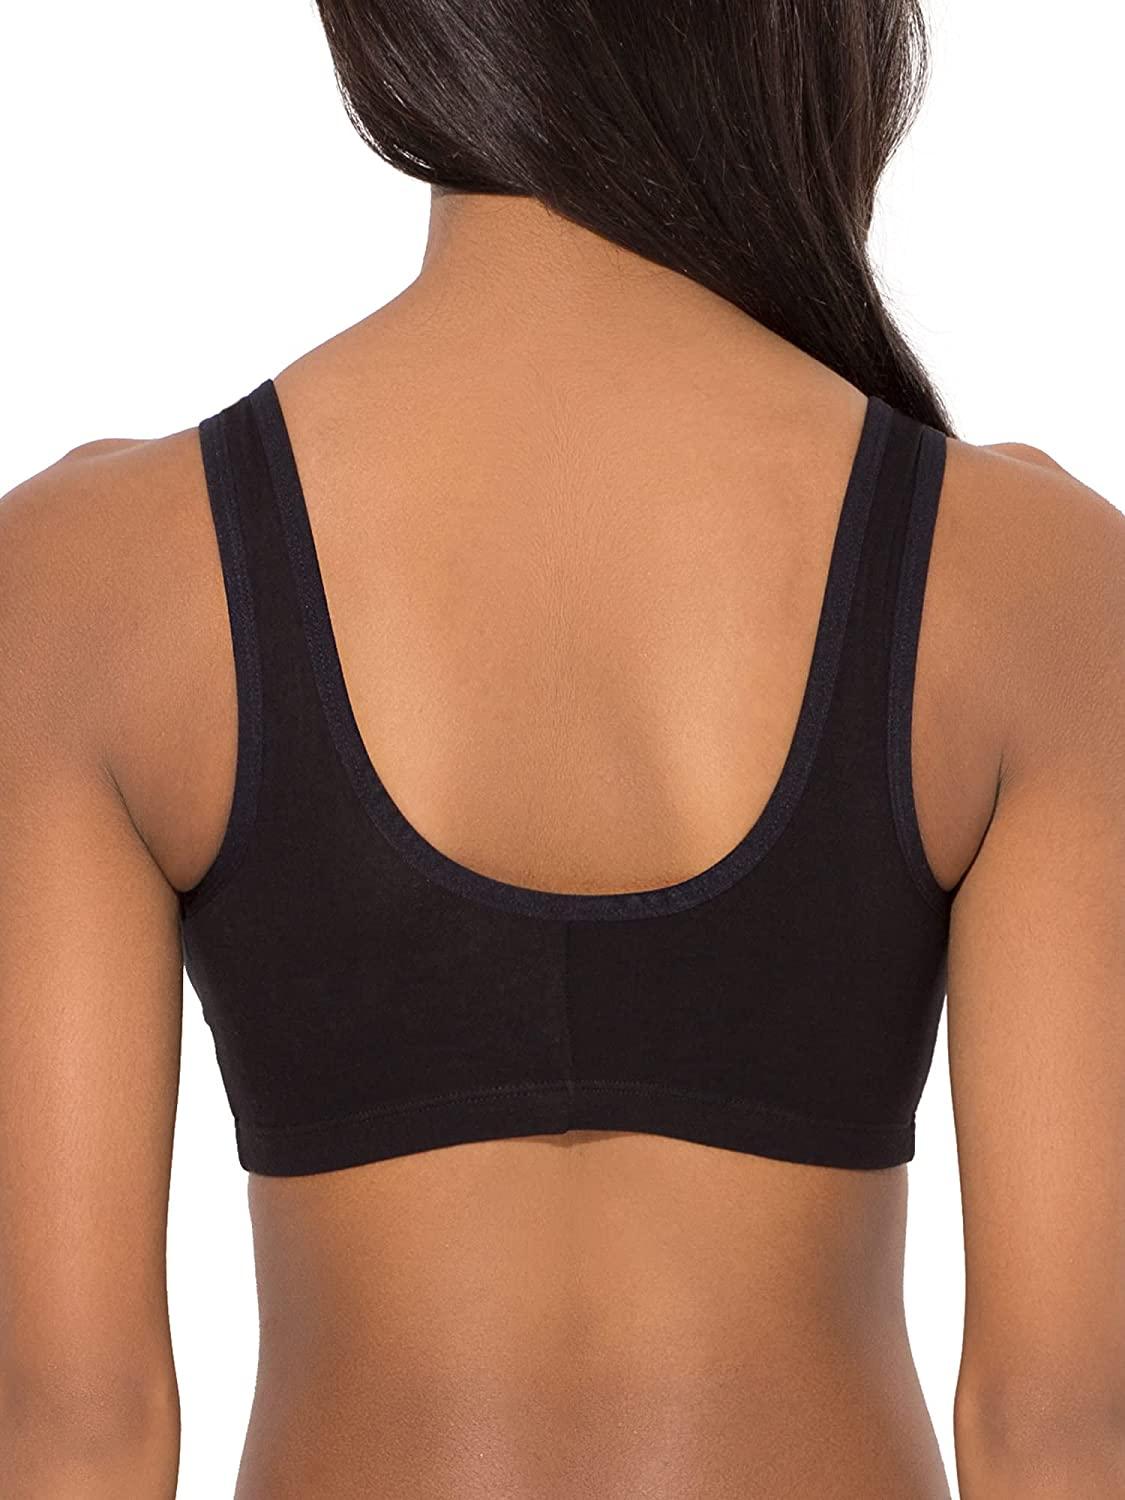 Fruit of the Loom Women's Comfort Front Close Sport Bra With Mesh Straps